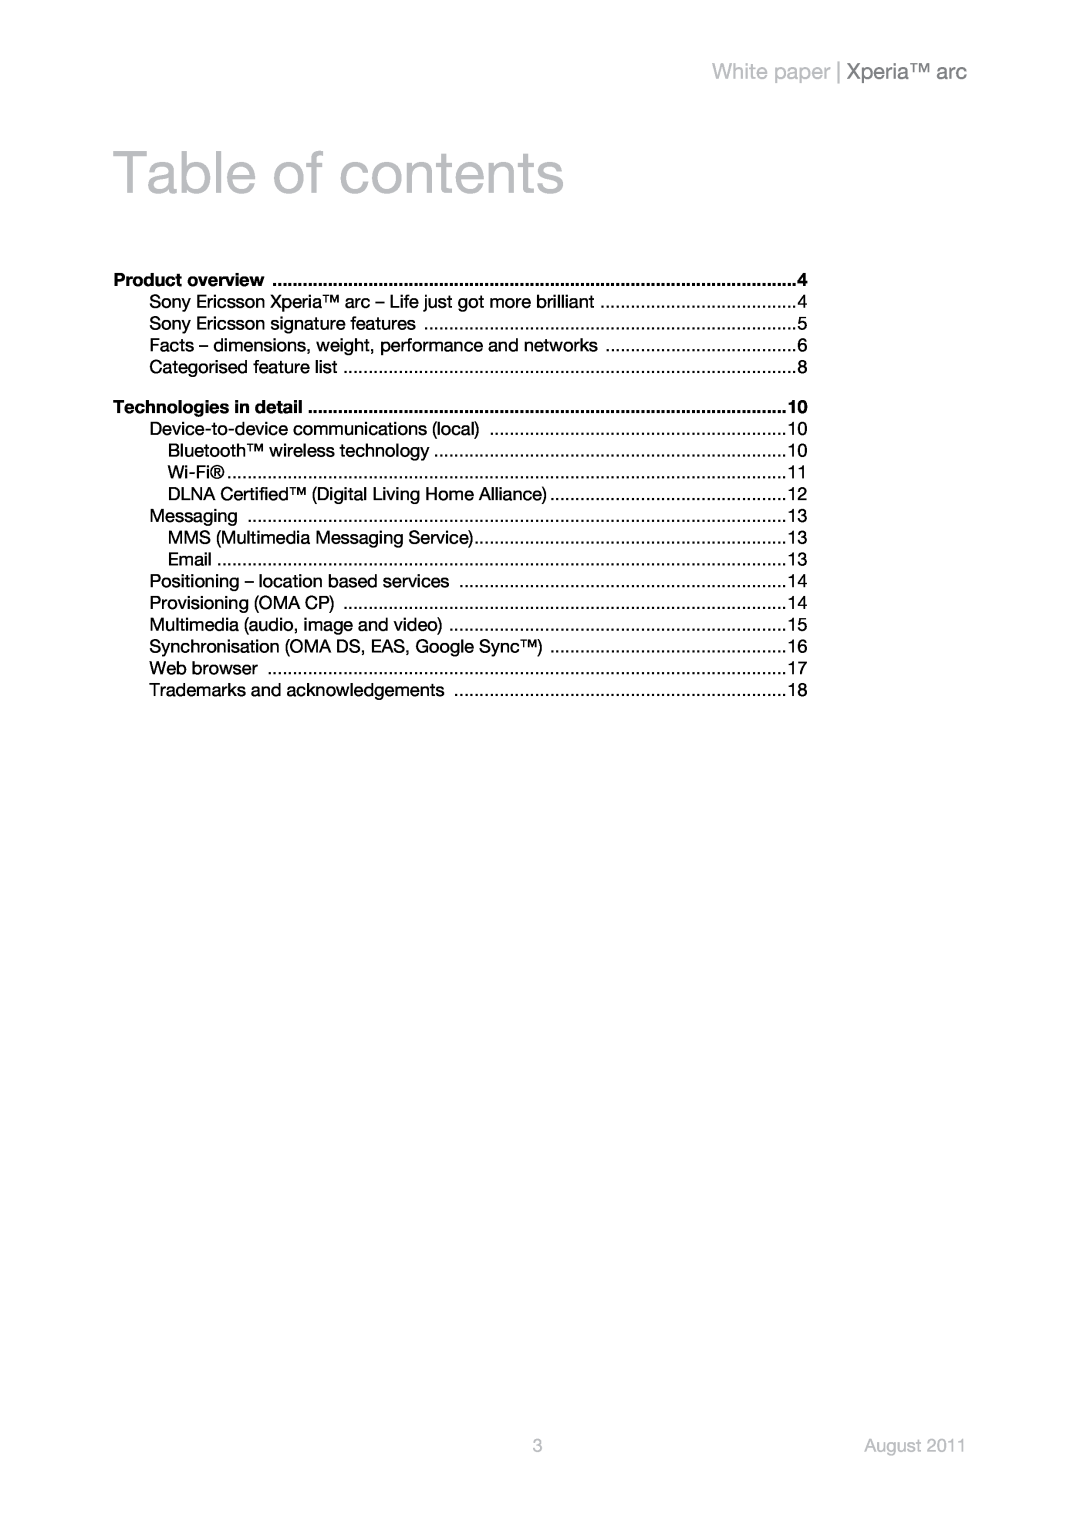 Sony Ericsson LT15i, LT15a manual Table of contents, White paper Xperia arc, August 